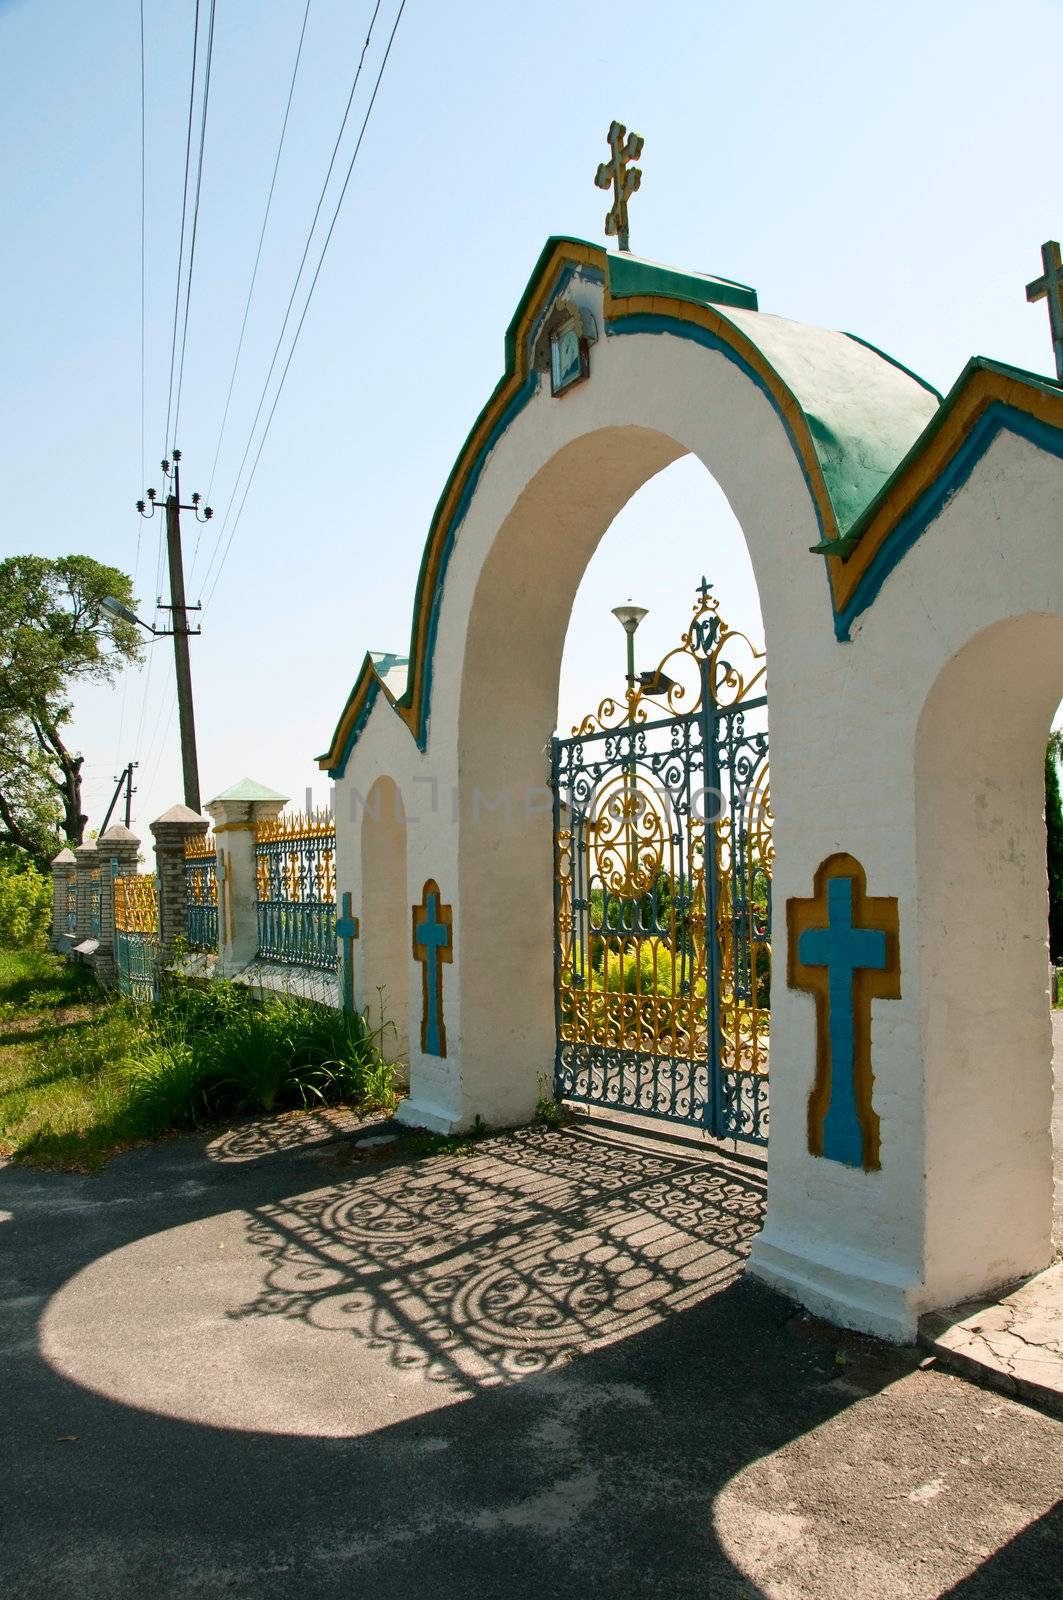 Gate at entrance to Church in Chernobyl, Ukraine